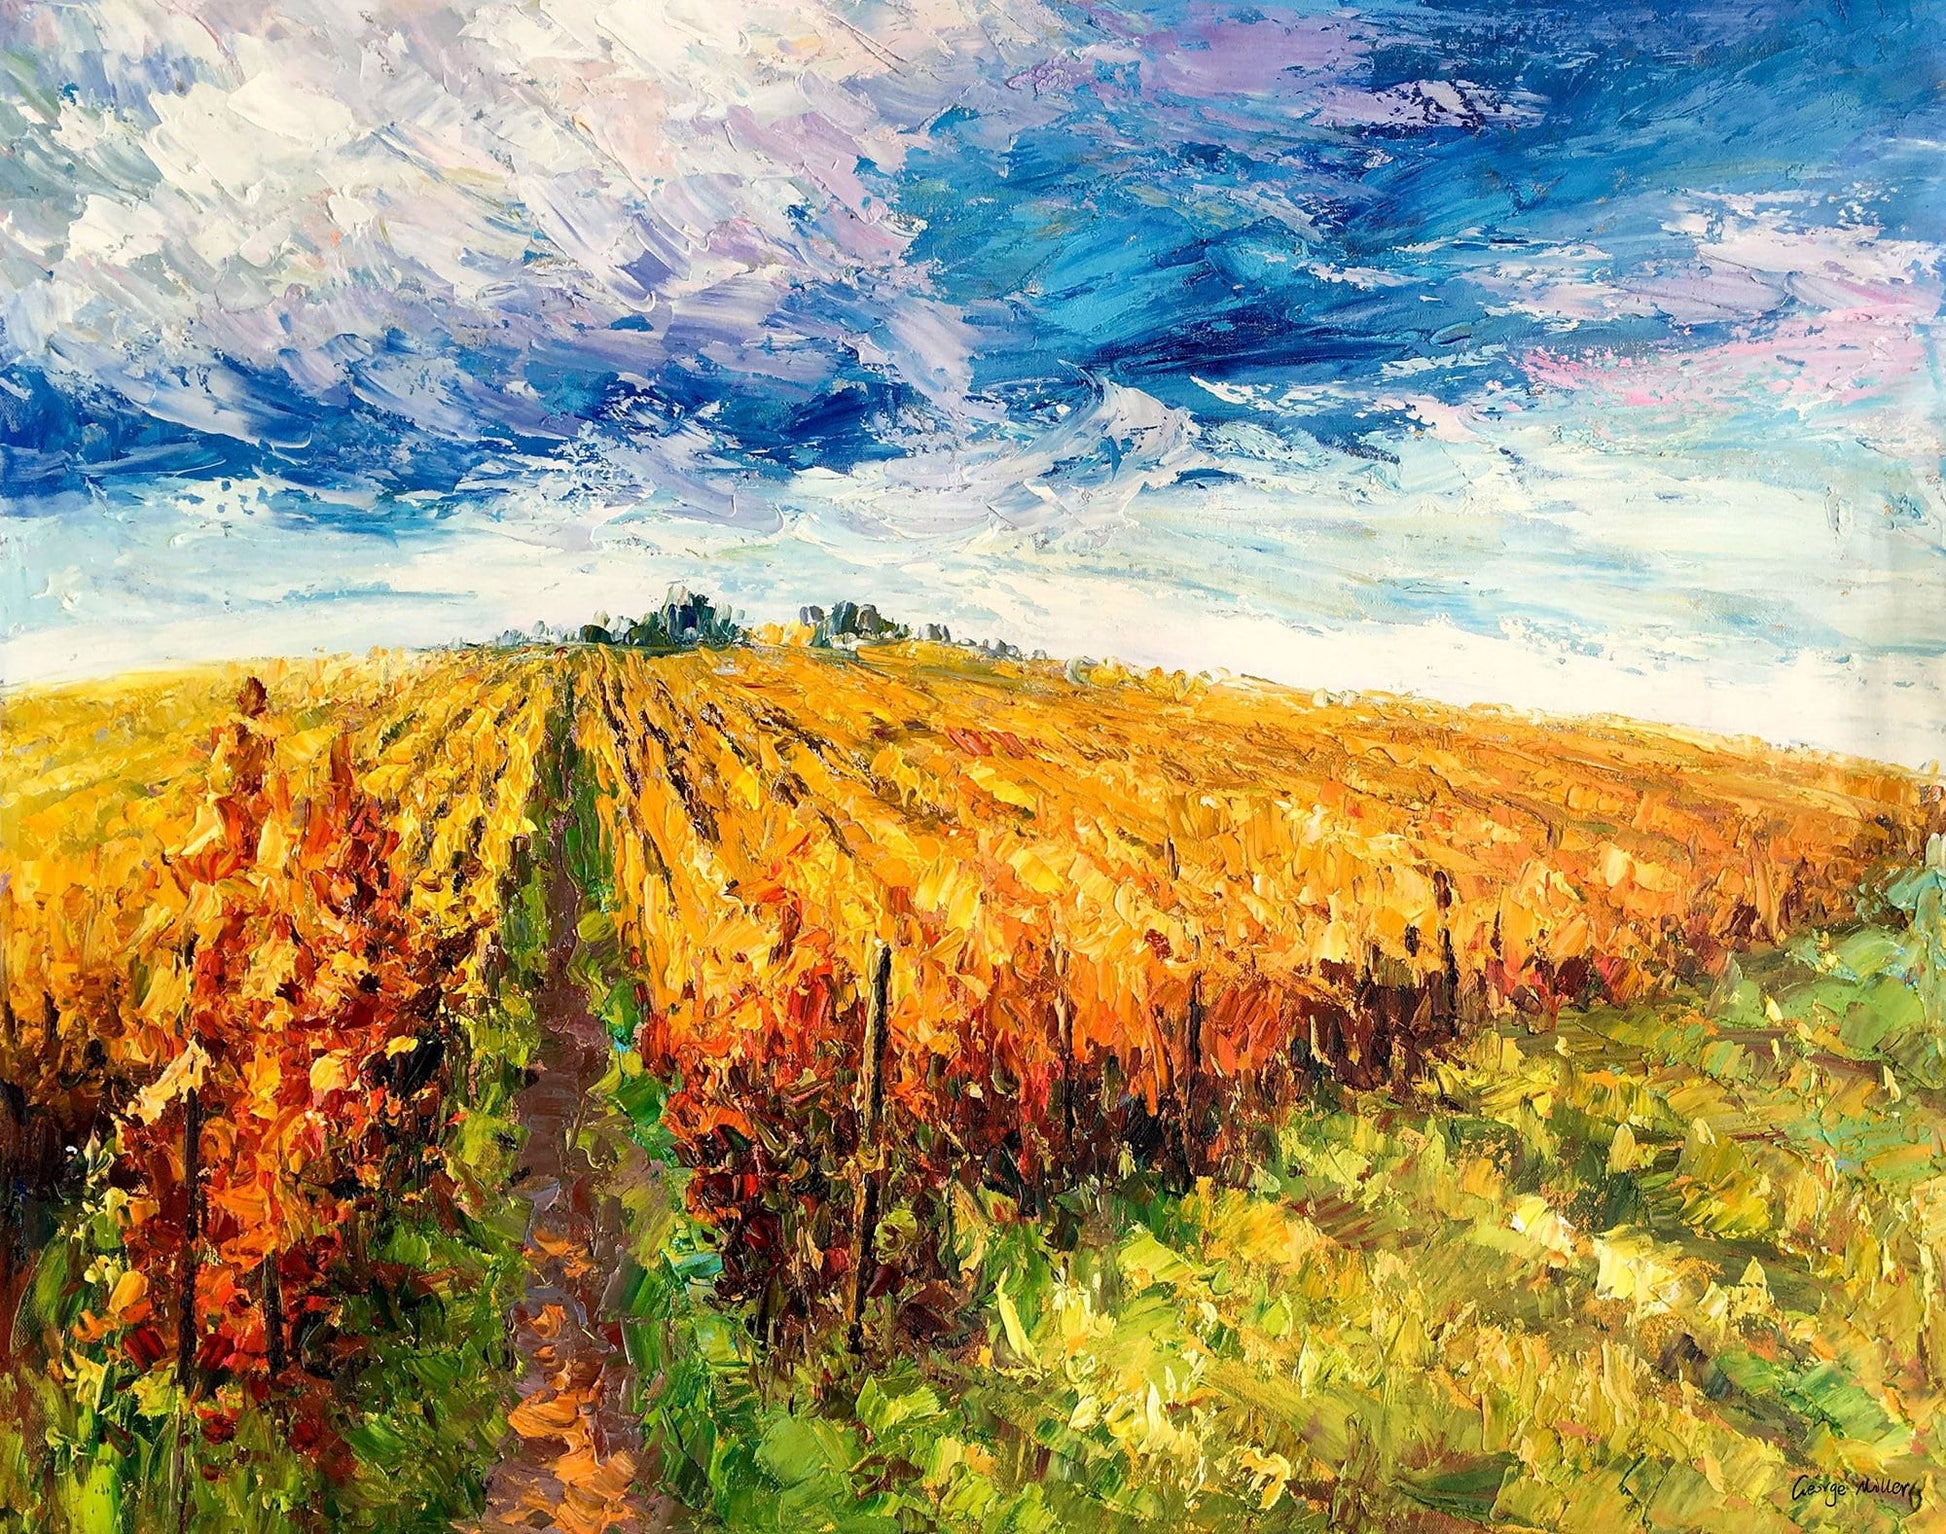 Large Oil Painting Autumn Vineyard, Abstract Oil Painting, Contemporary Art, Canvas Wall Art, Abstract Art, Original Oil Painting Landscape